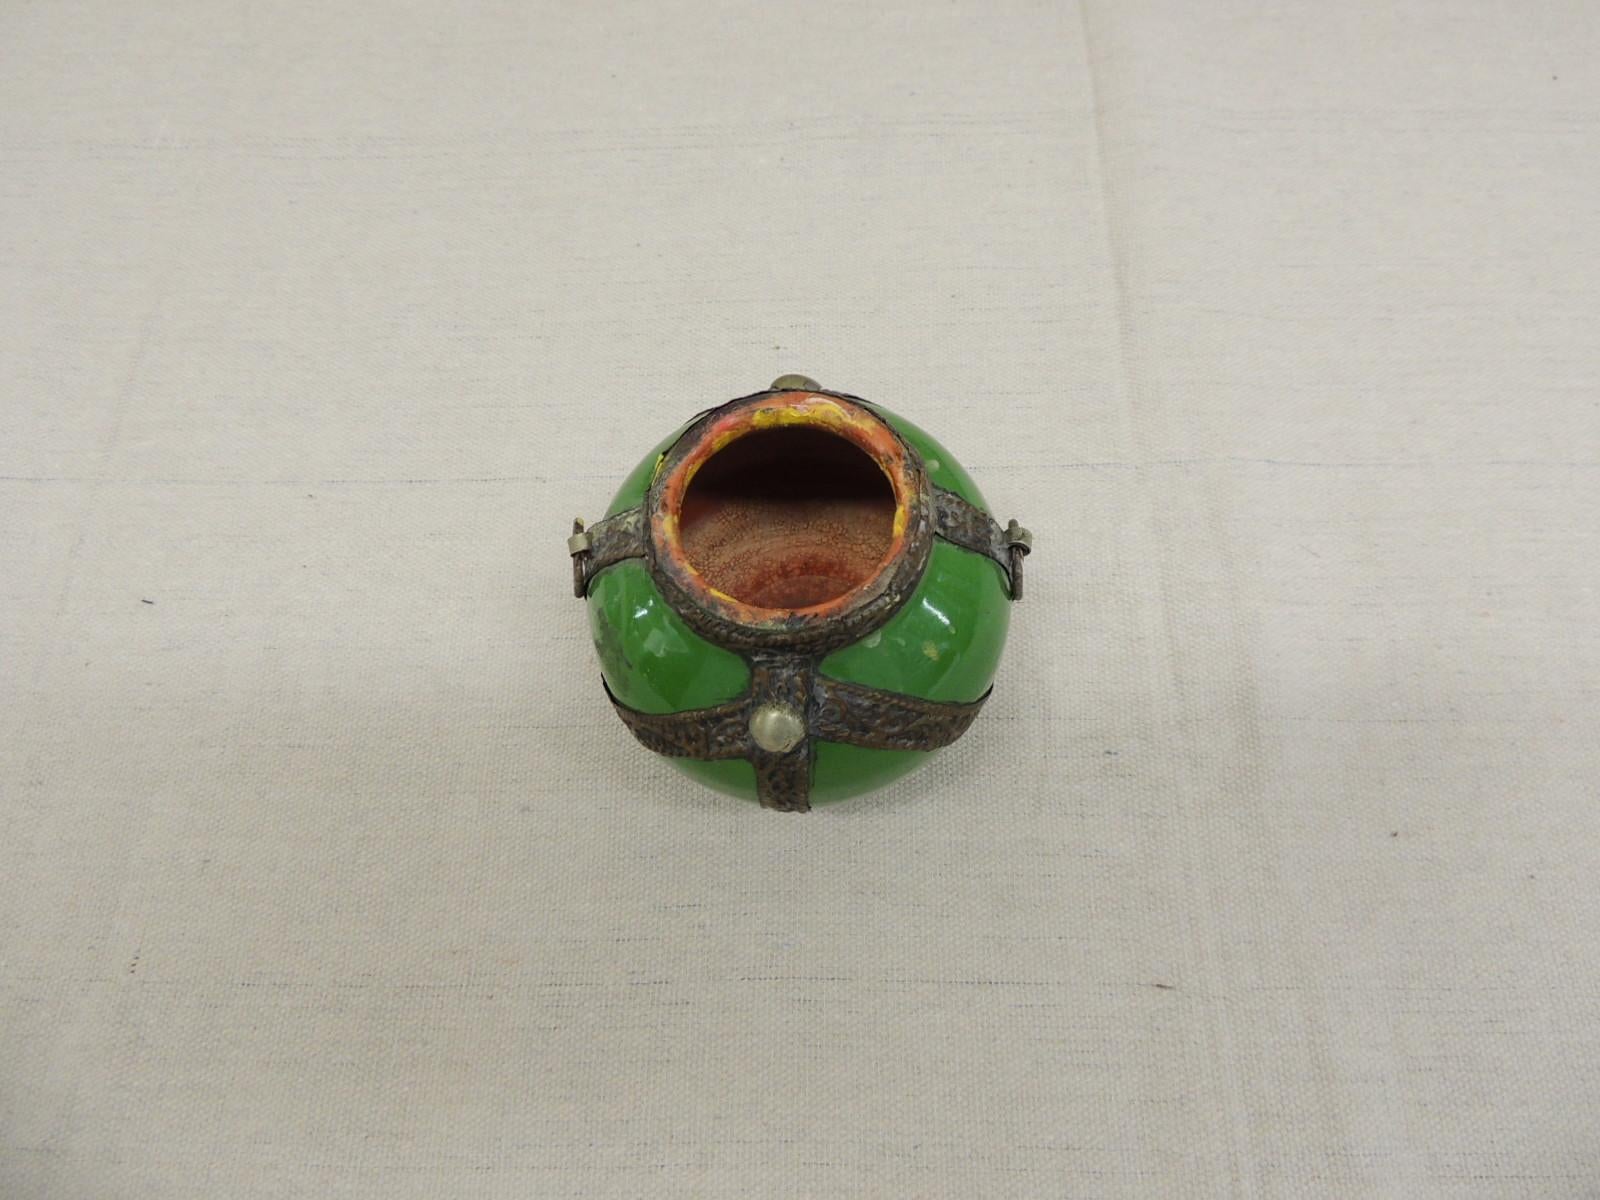 Miniature vintage Moroccan green vase
Adorned with tin fittings all around
Size: 4